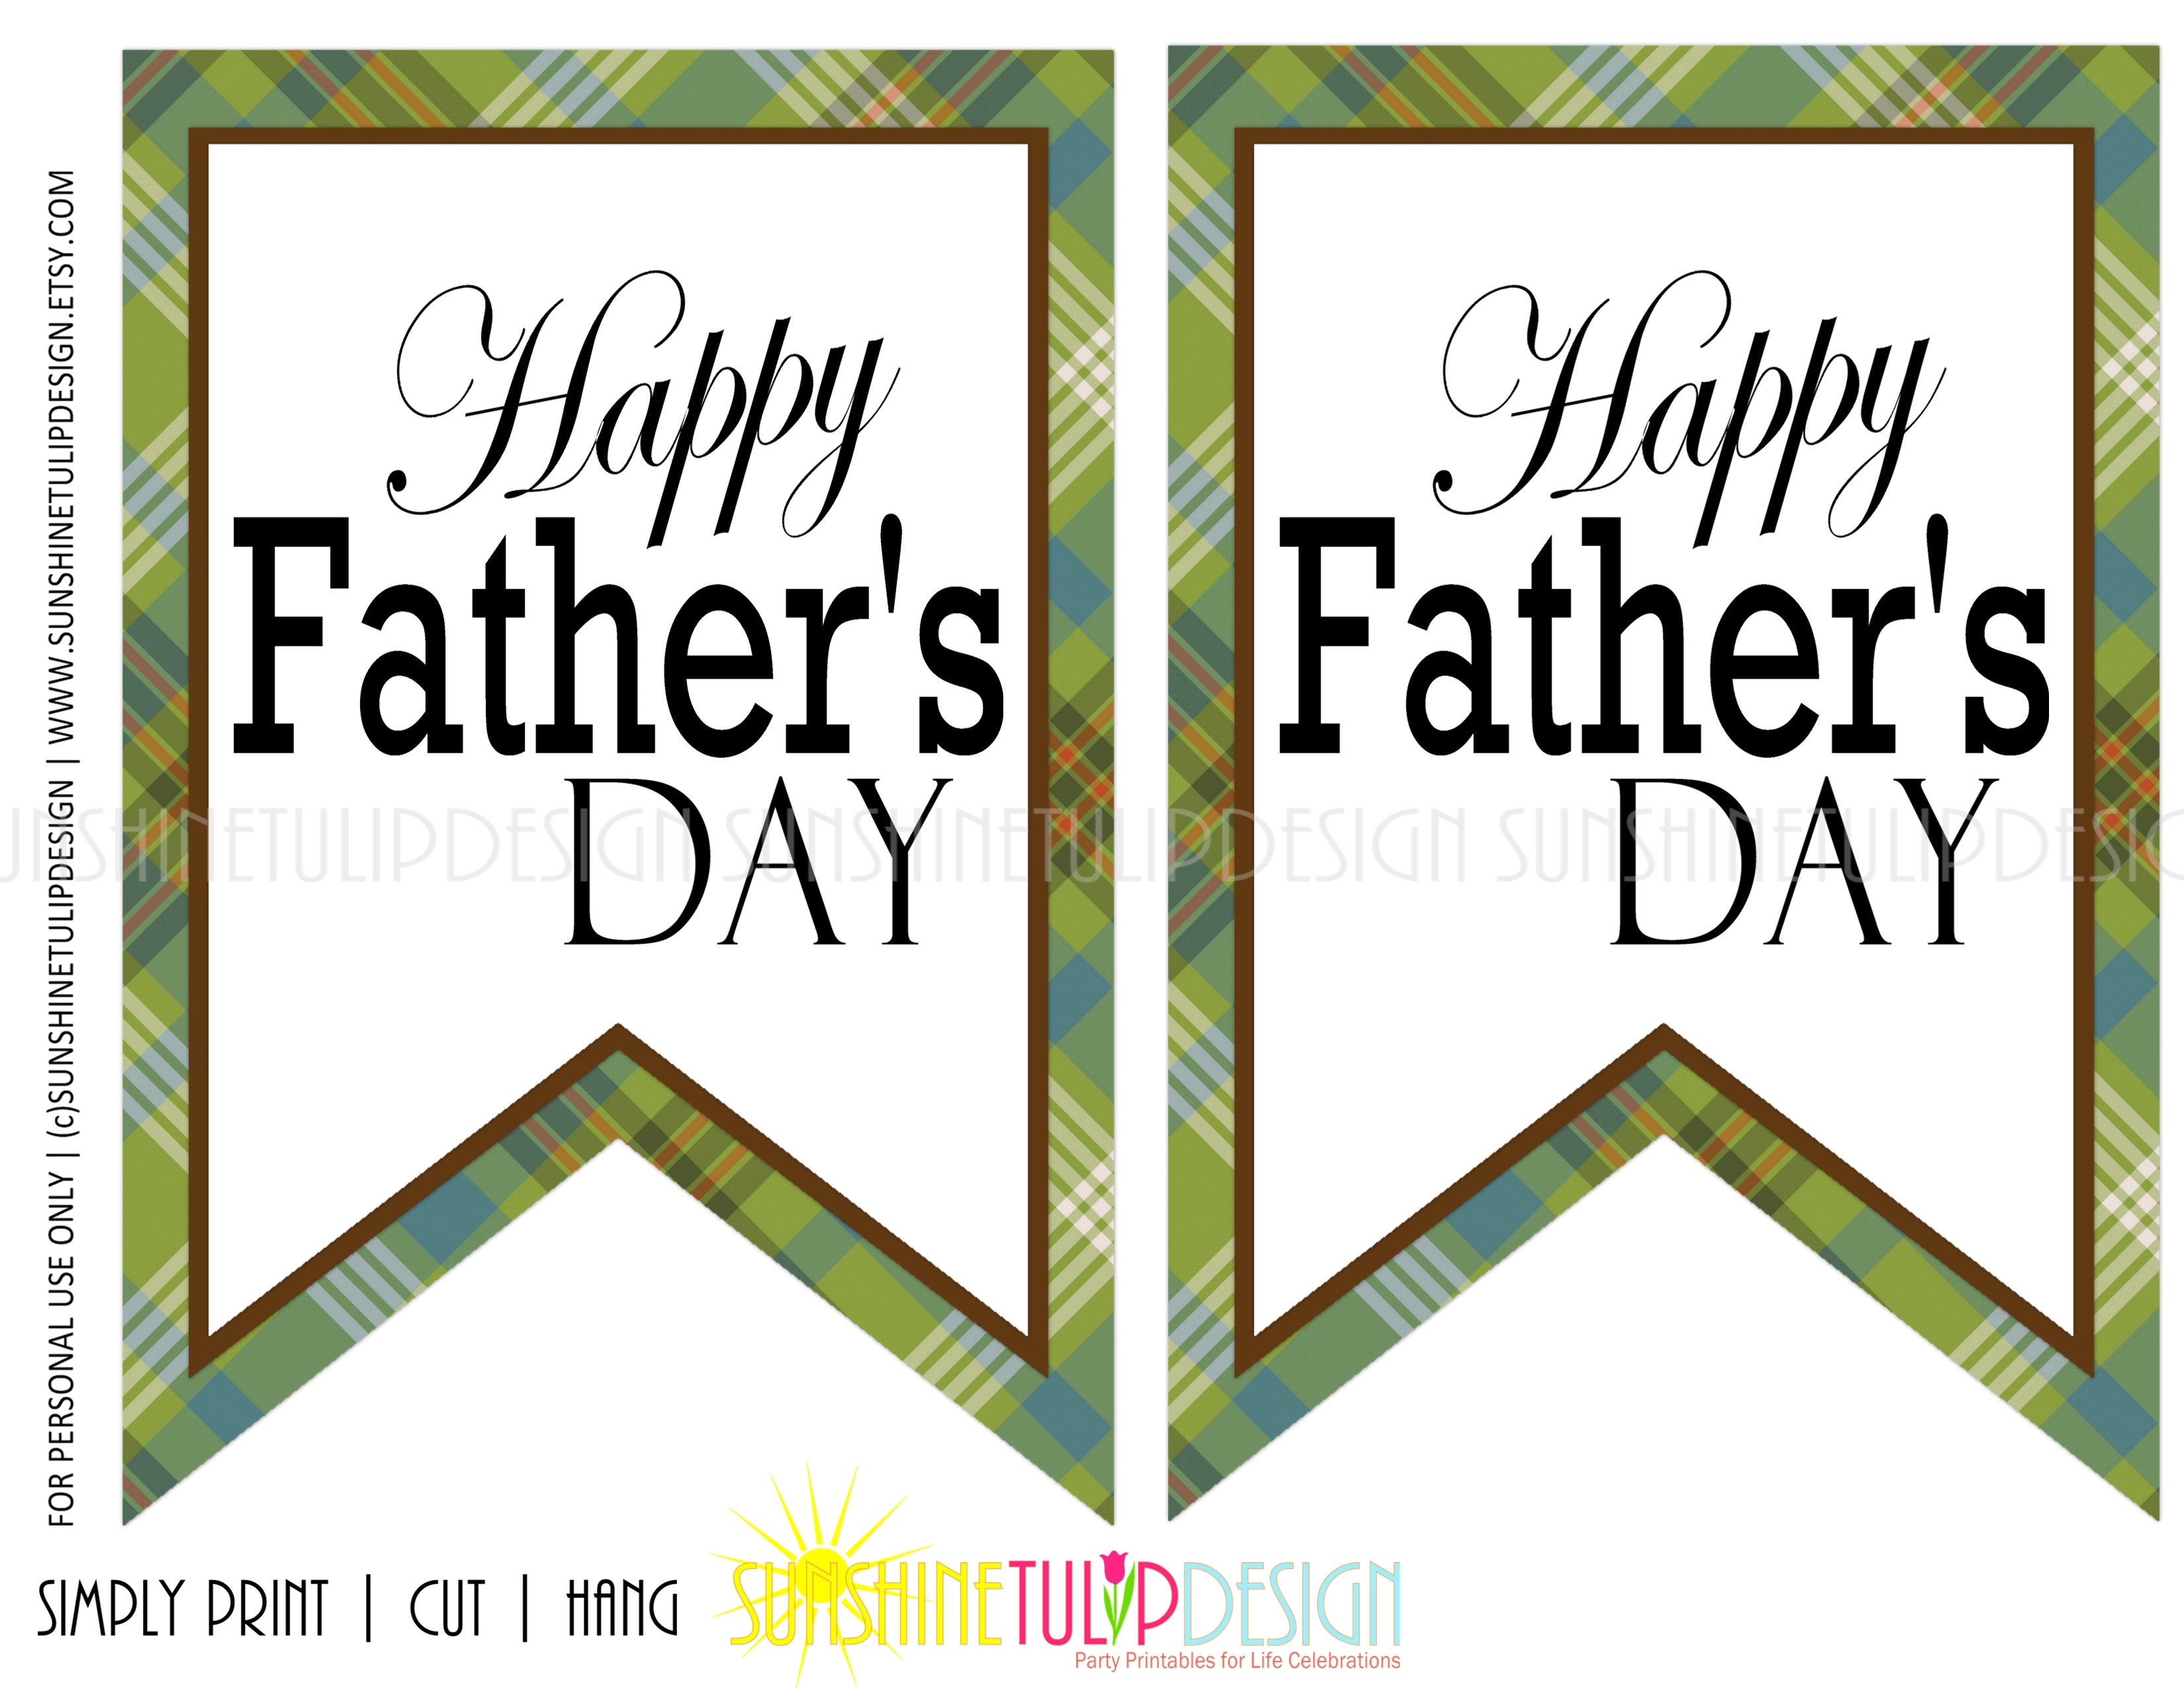 4-best-images-of-father-s-day-printable-banner-happy-father-s-day